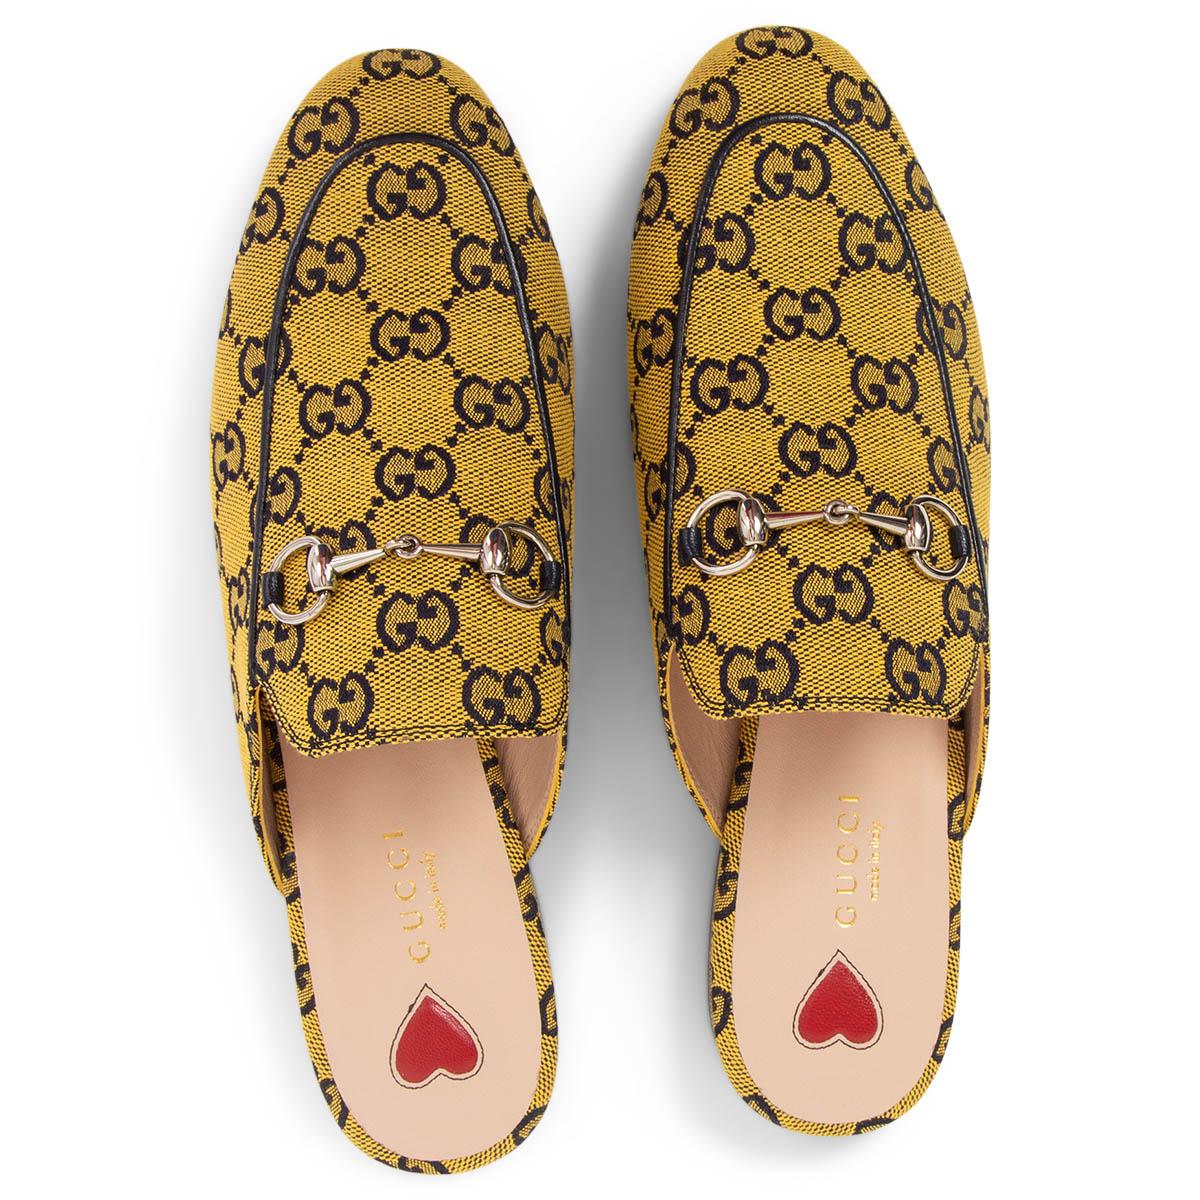 gucci yellow shoes